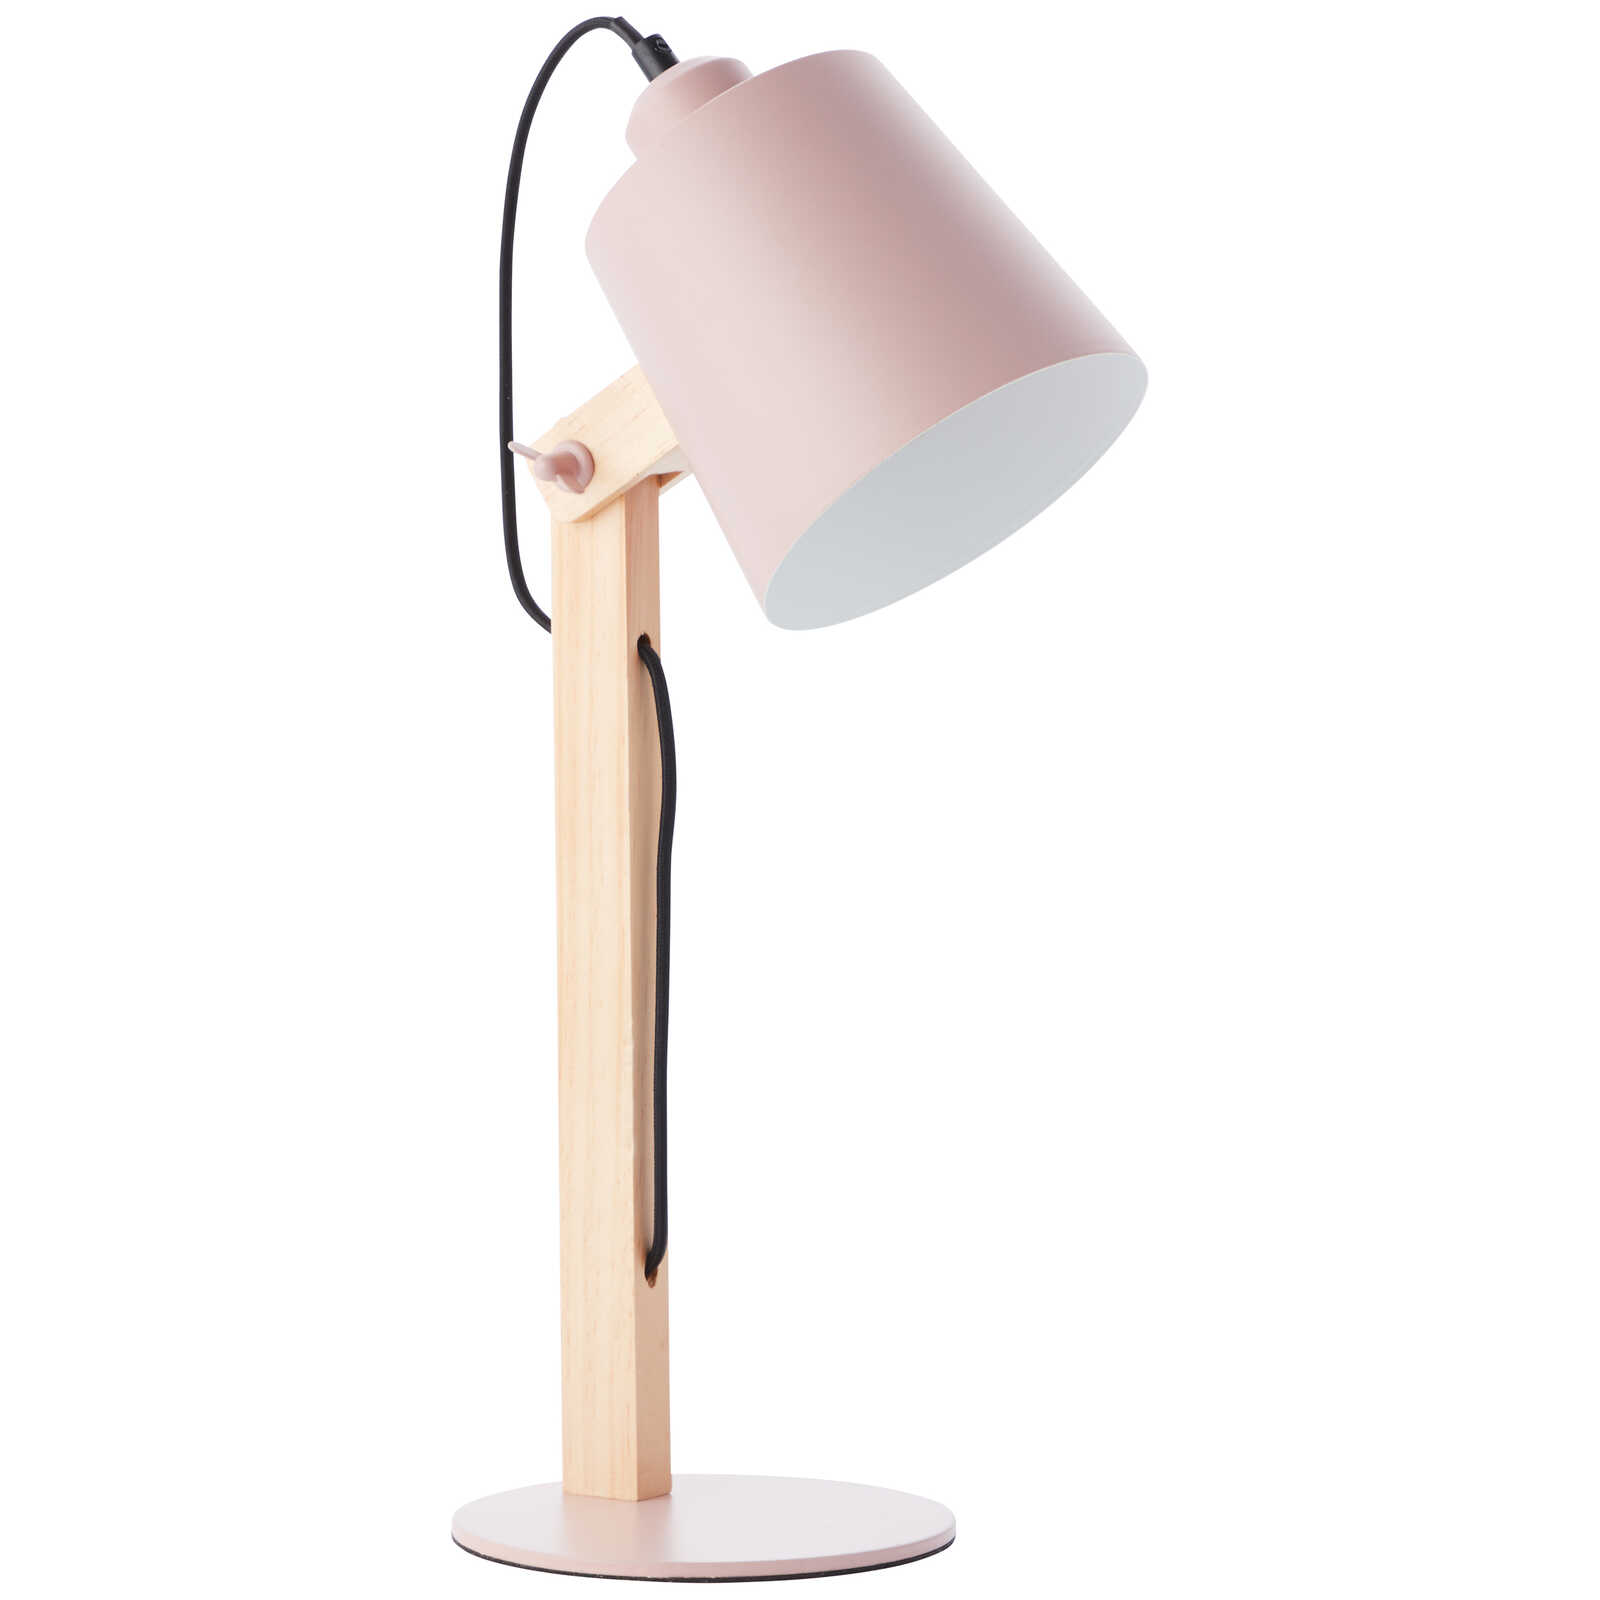             Wooden table lamp - Paul 2 - Pink
        